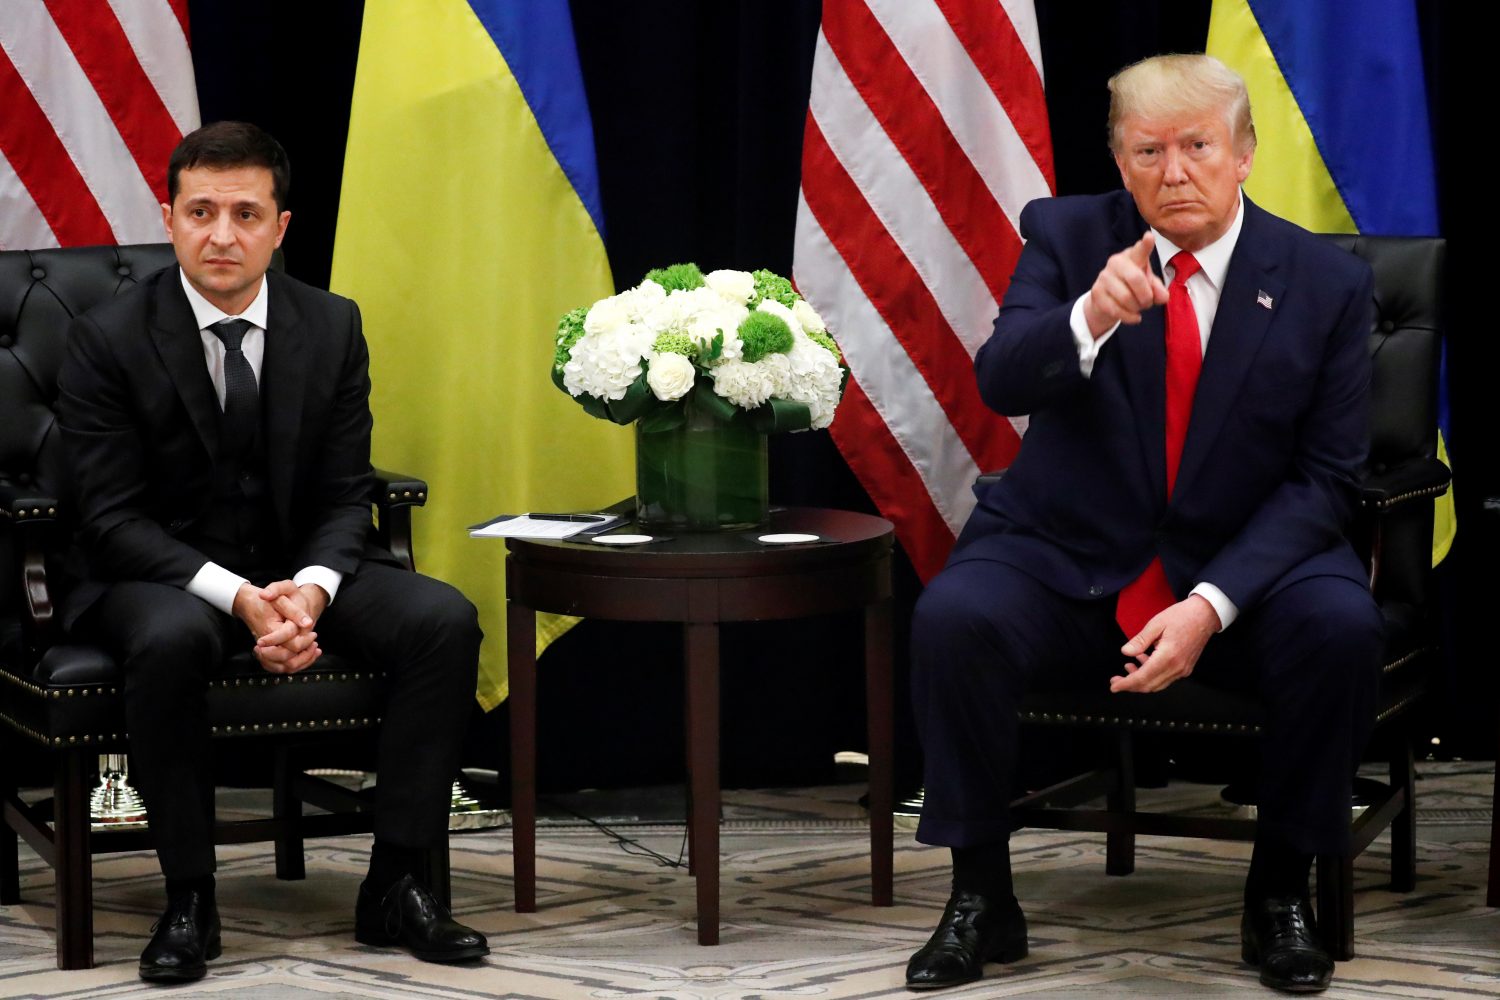 It’s counterintuitive but Trump impeachment inquiry may help Ukraine